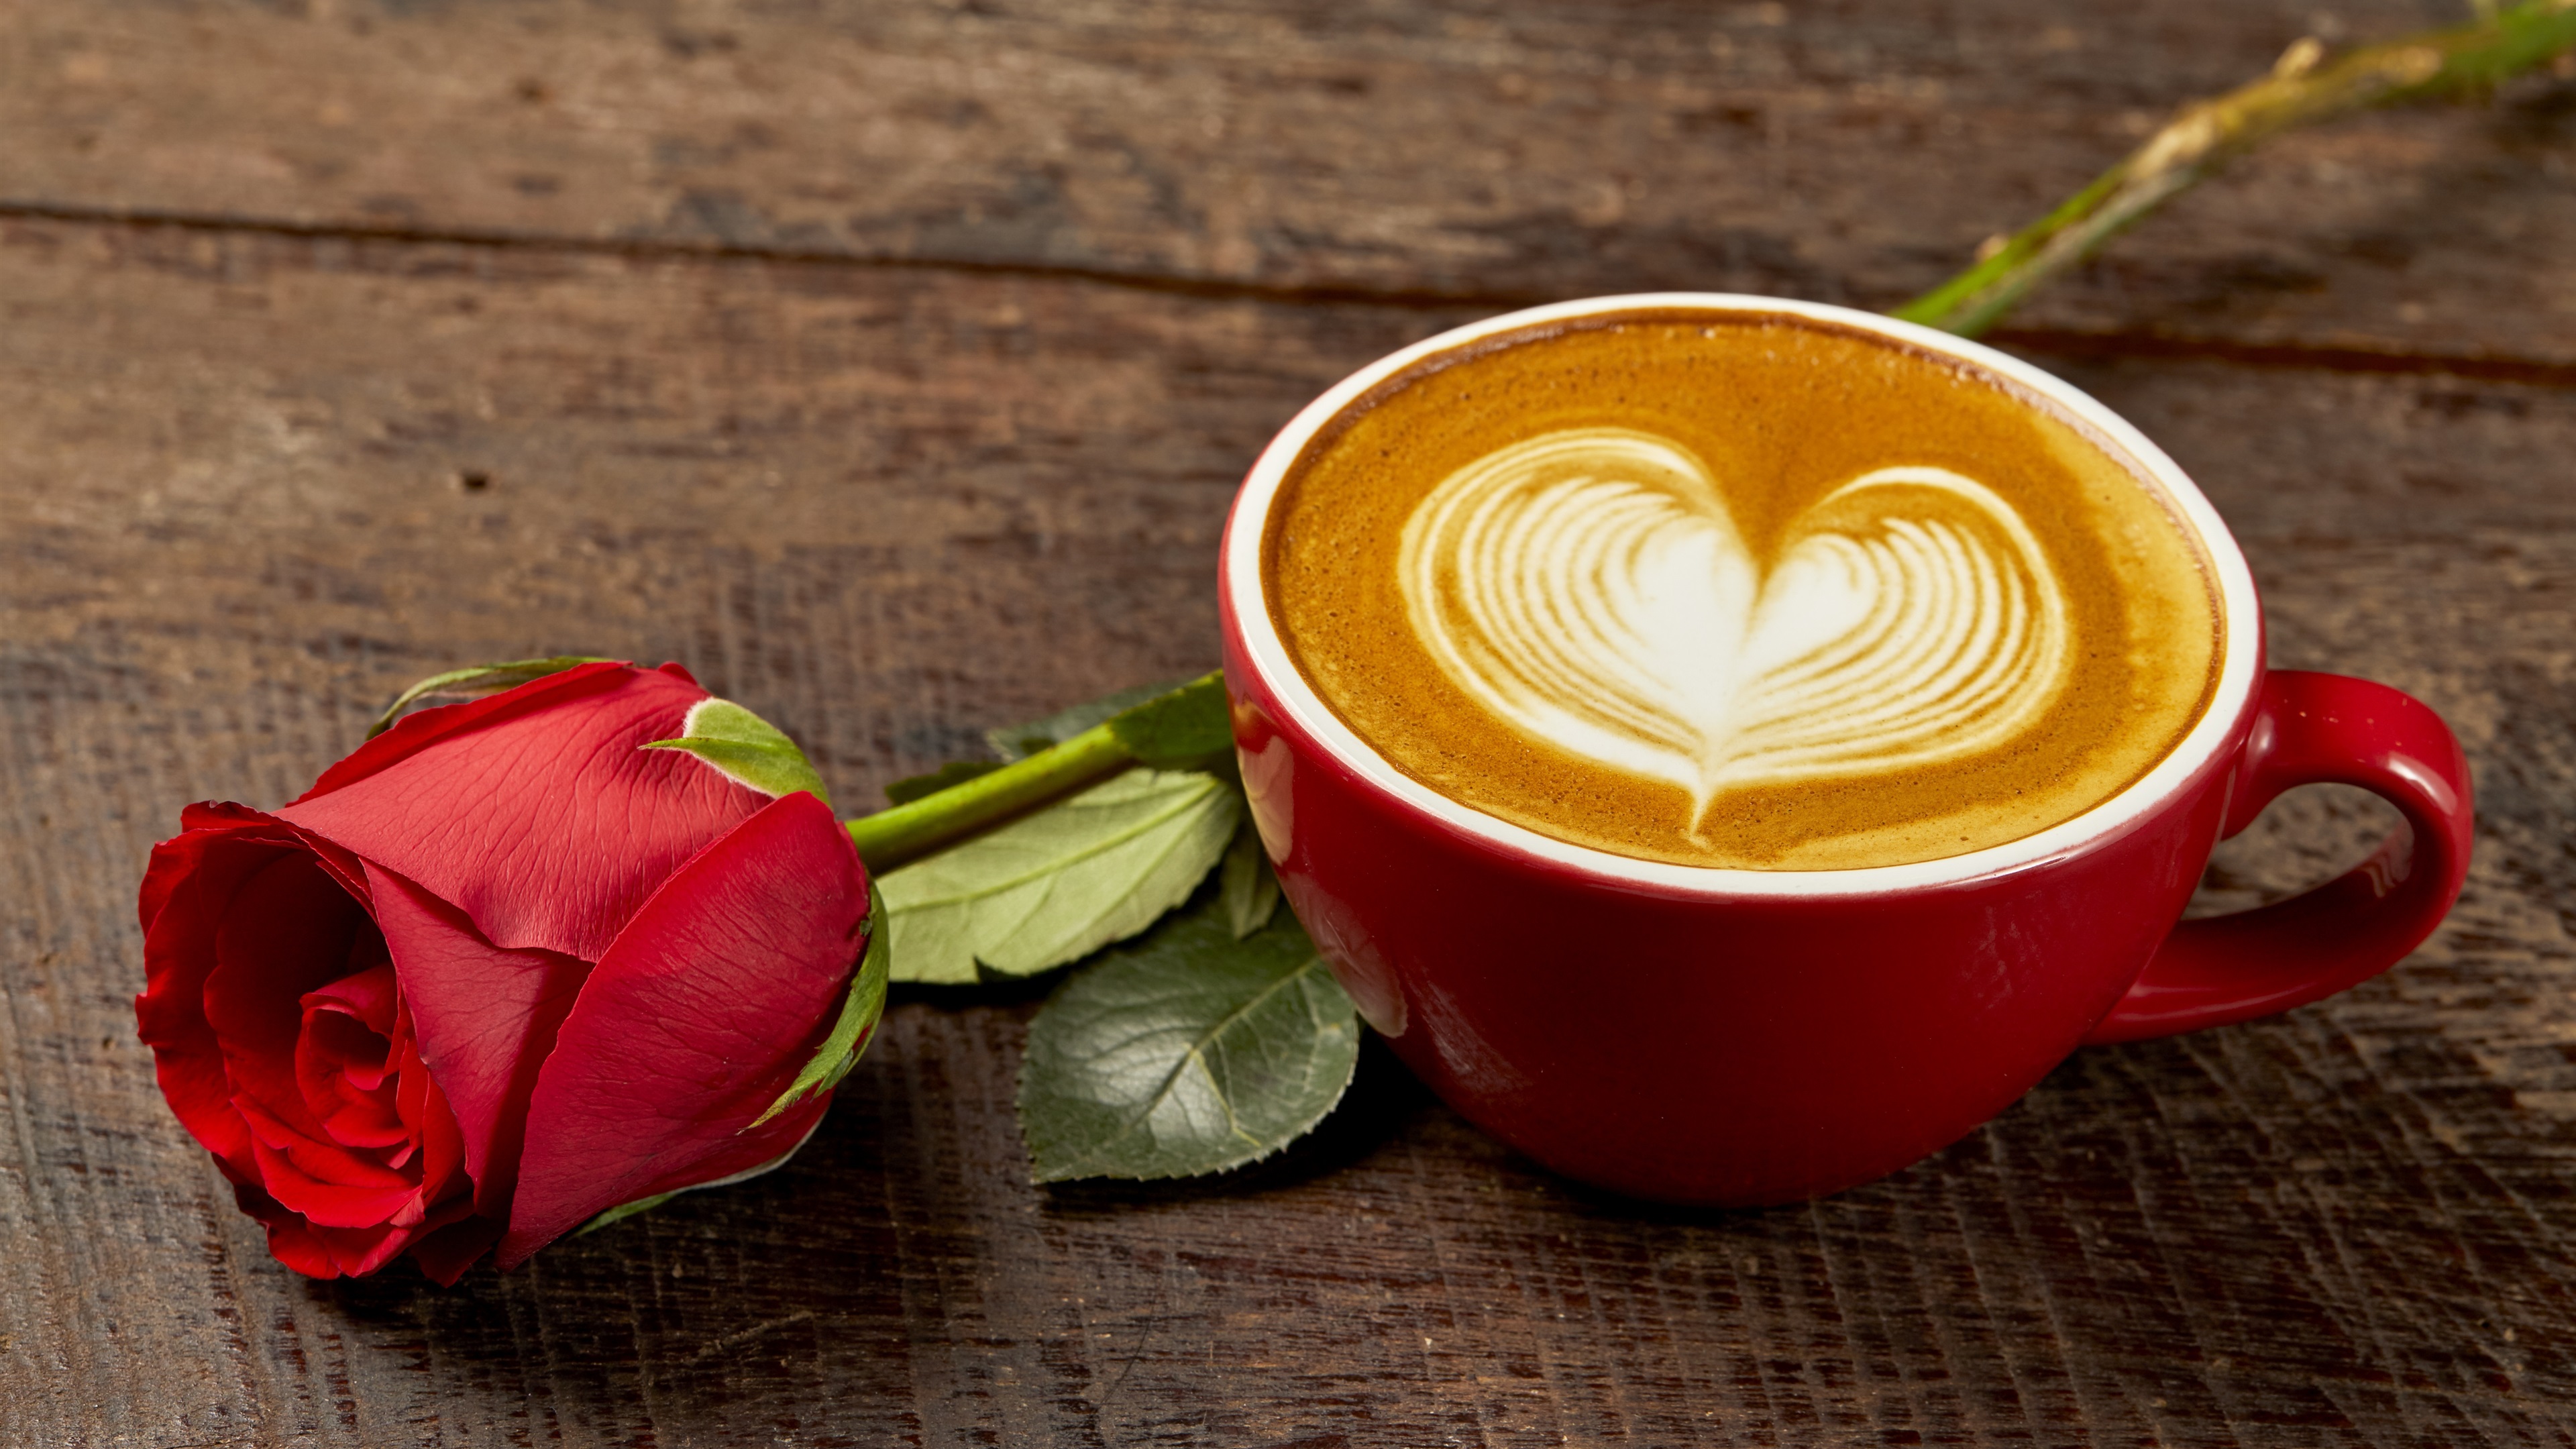 Wallpaper Red rose and one cup of coffee, love heart